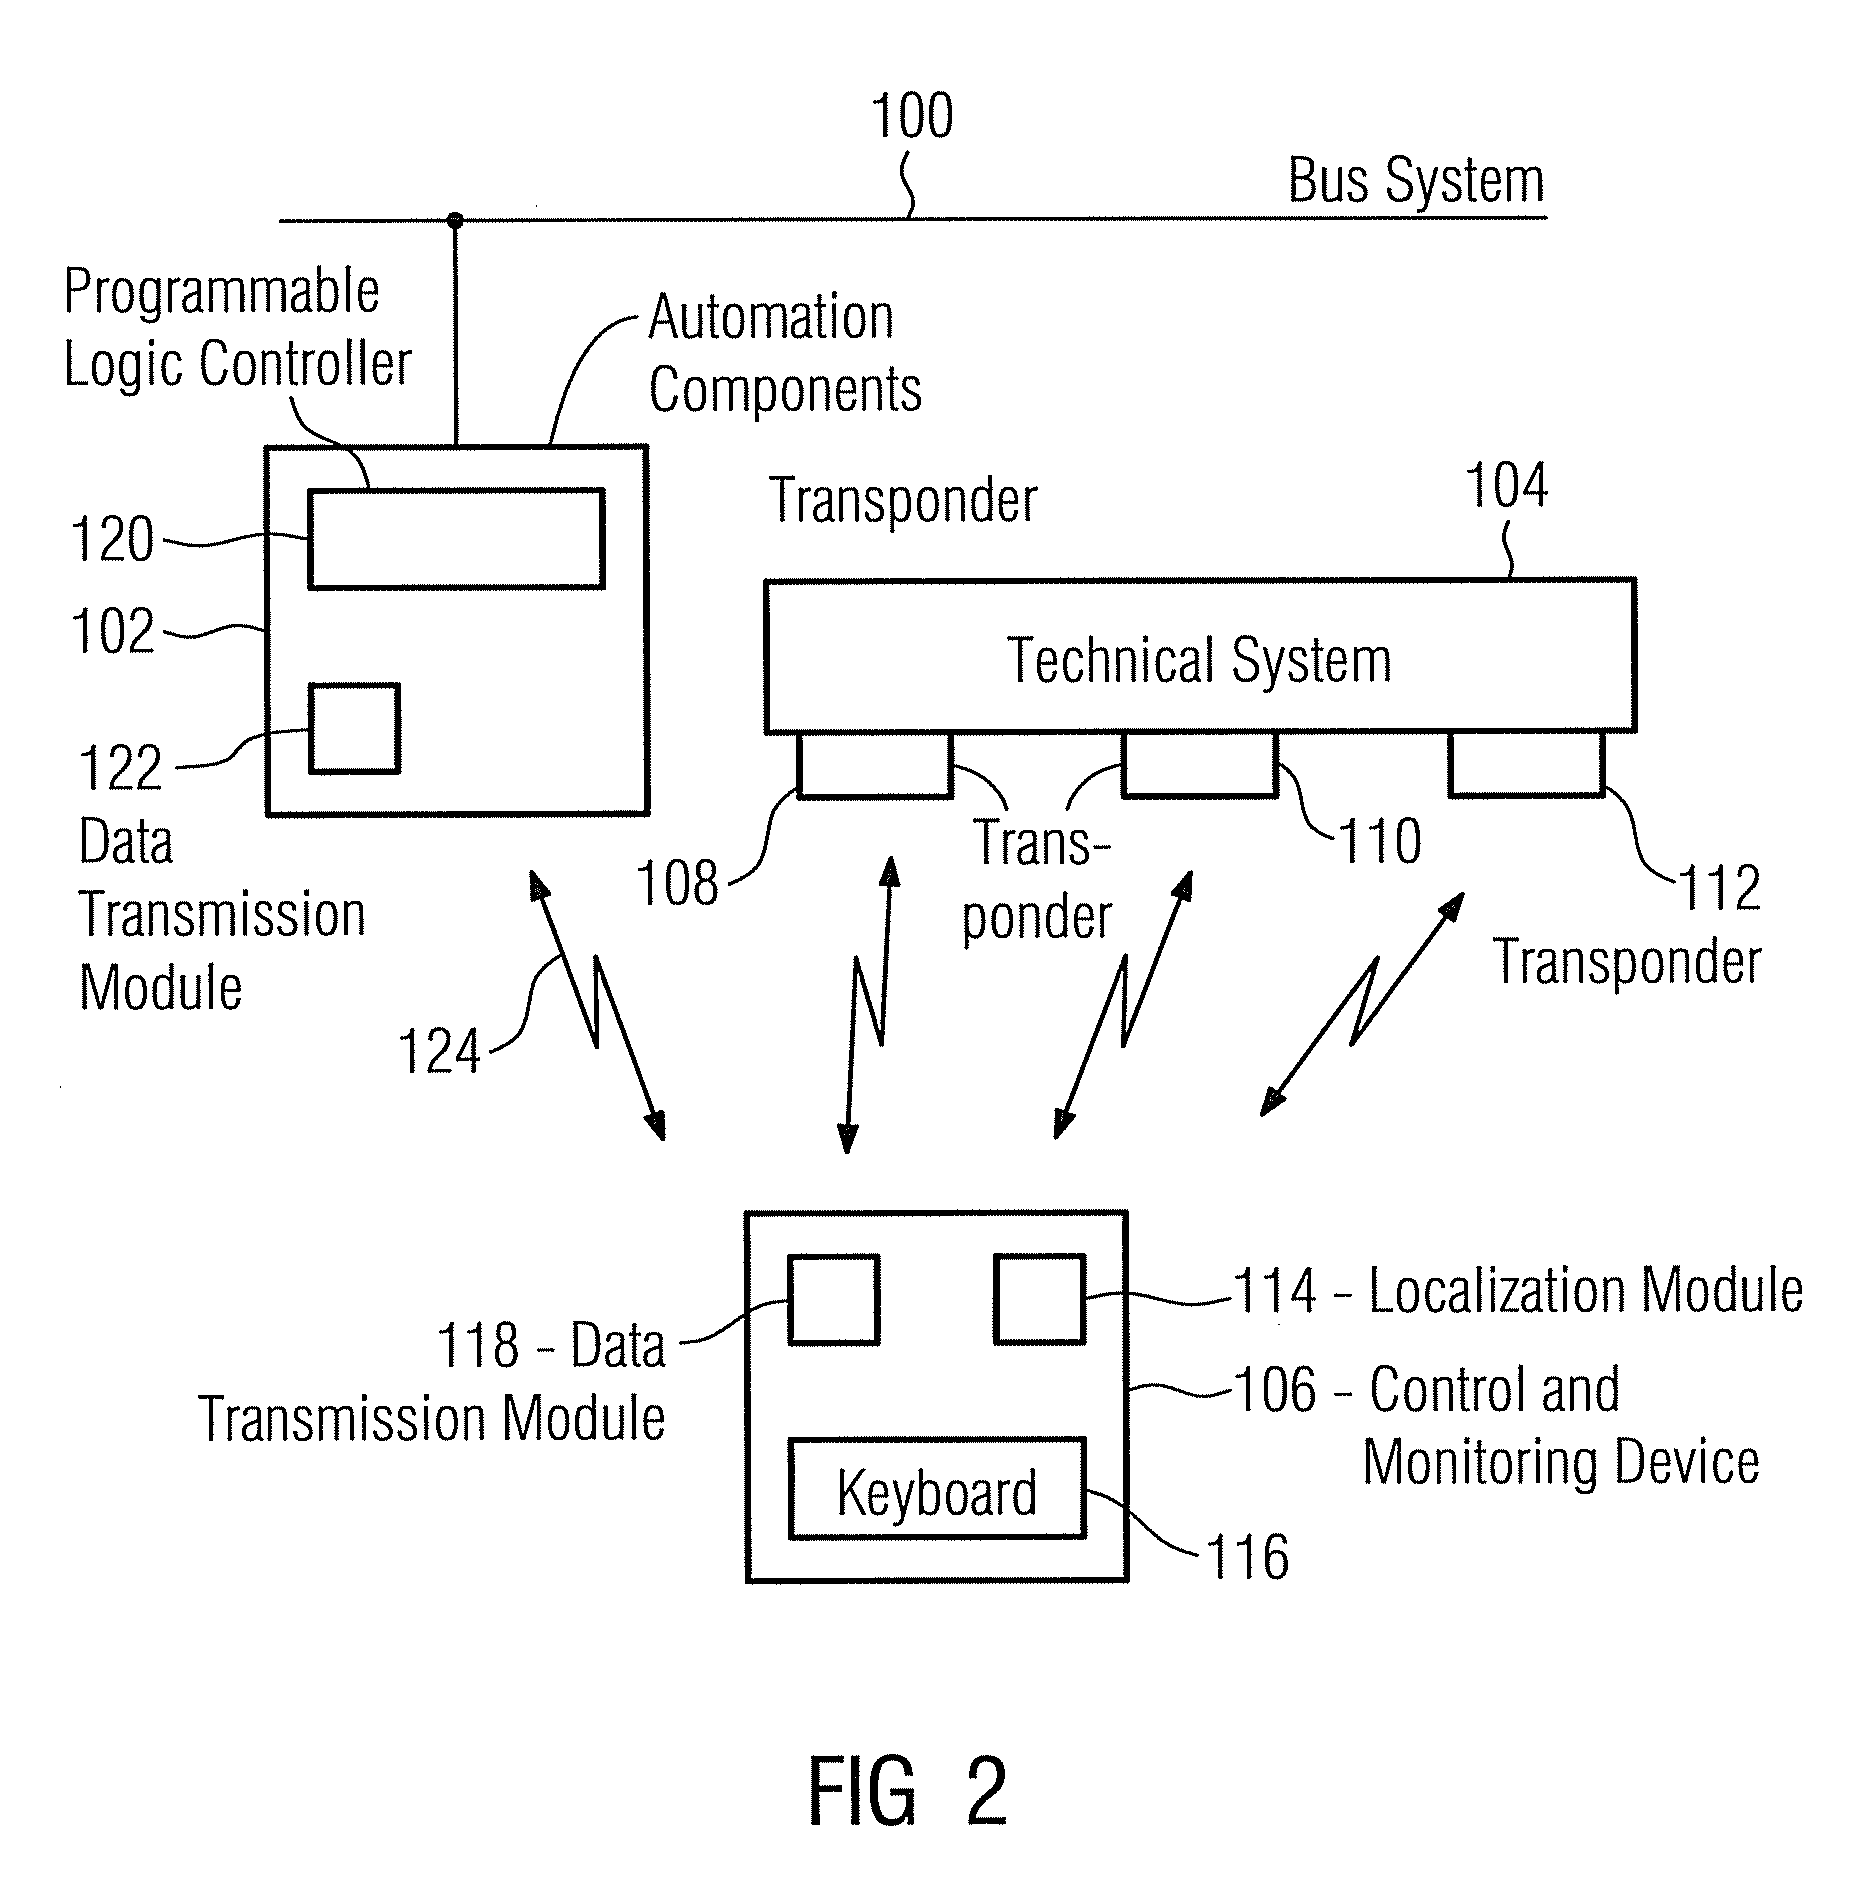 Method for distance measurement and data transmission in a continuous wave radar system